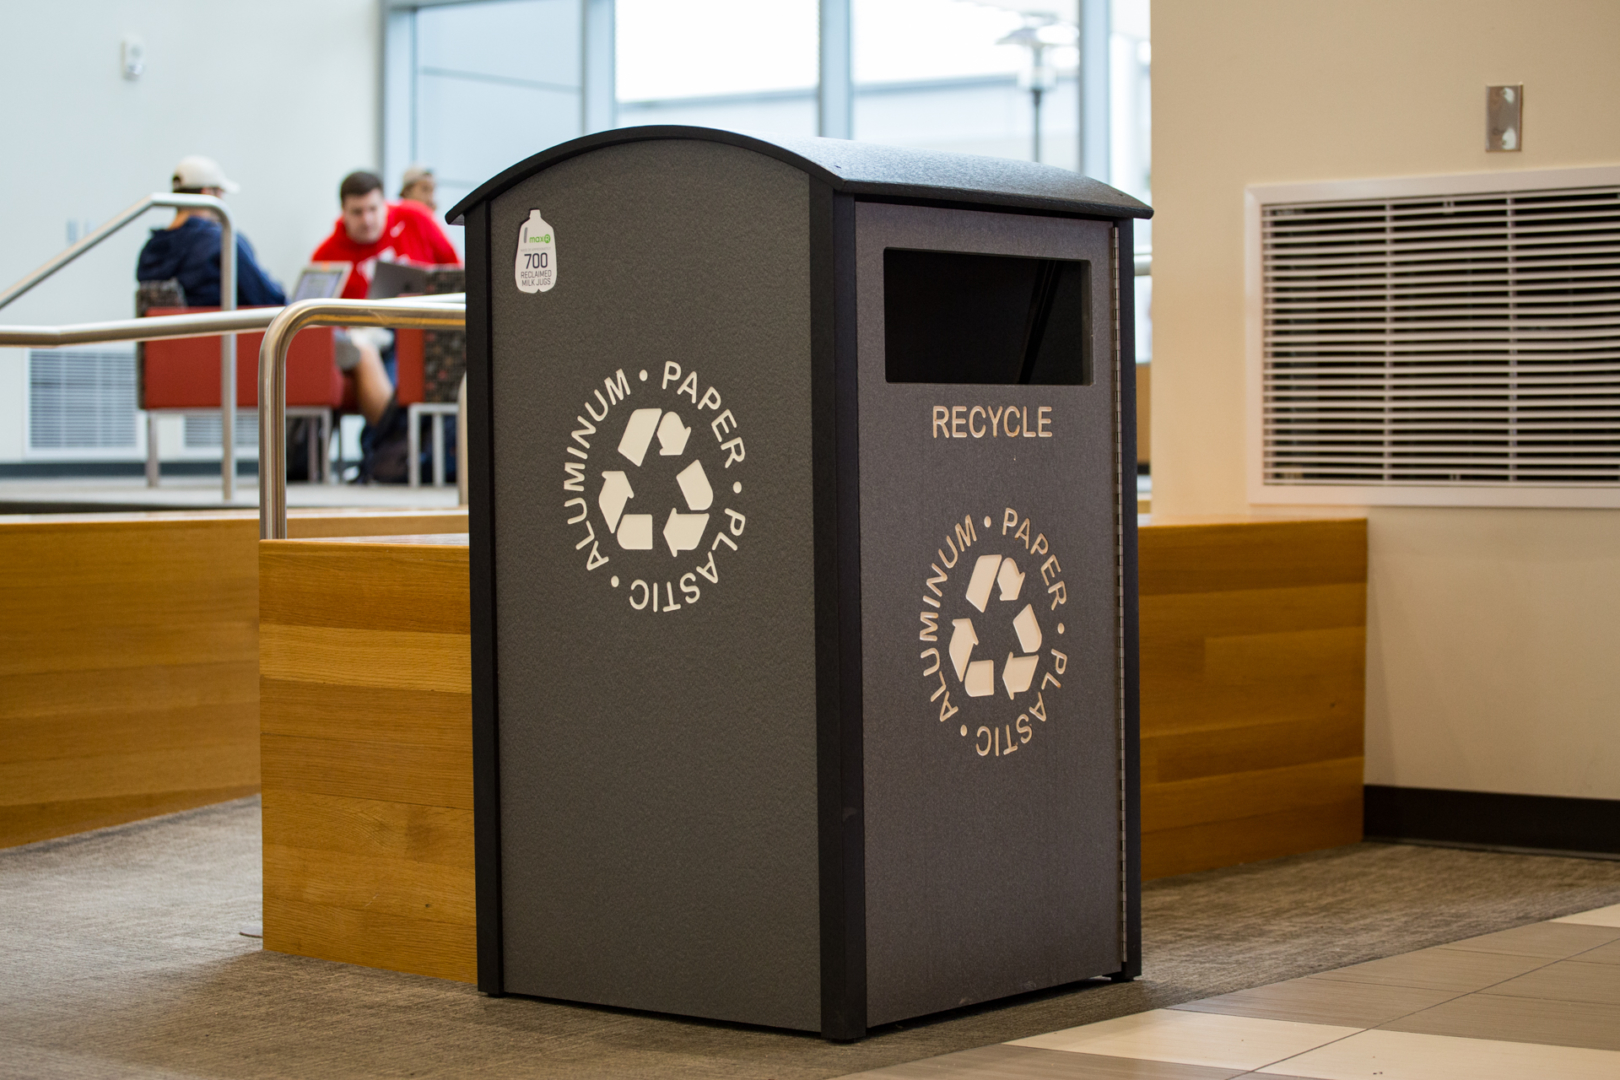 Students should recycle, but helping the environment requires much more. | Trevor Nolley/ The Cougar